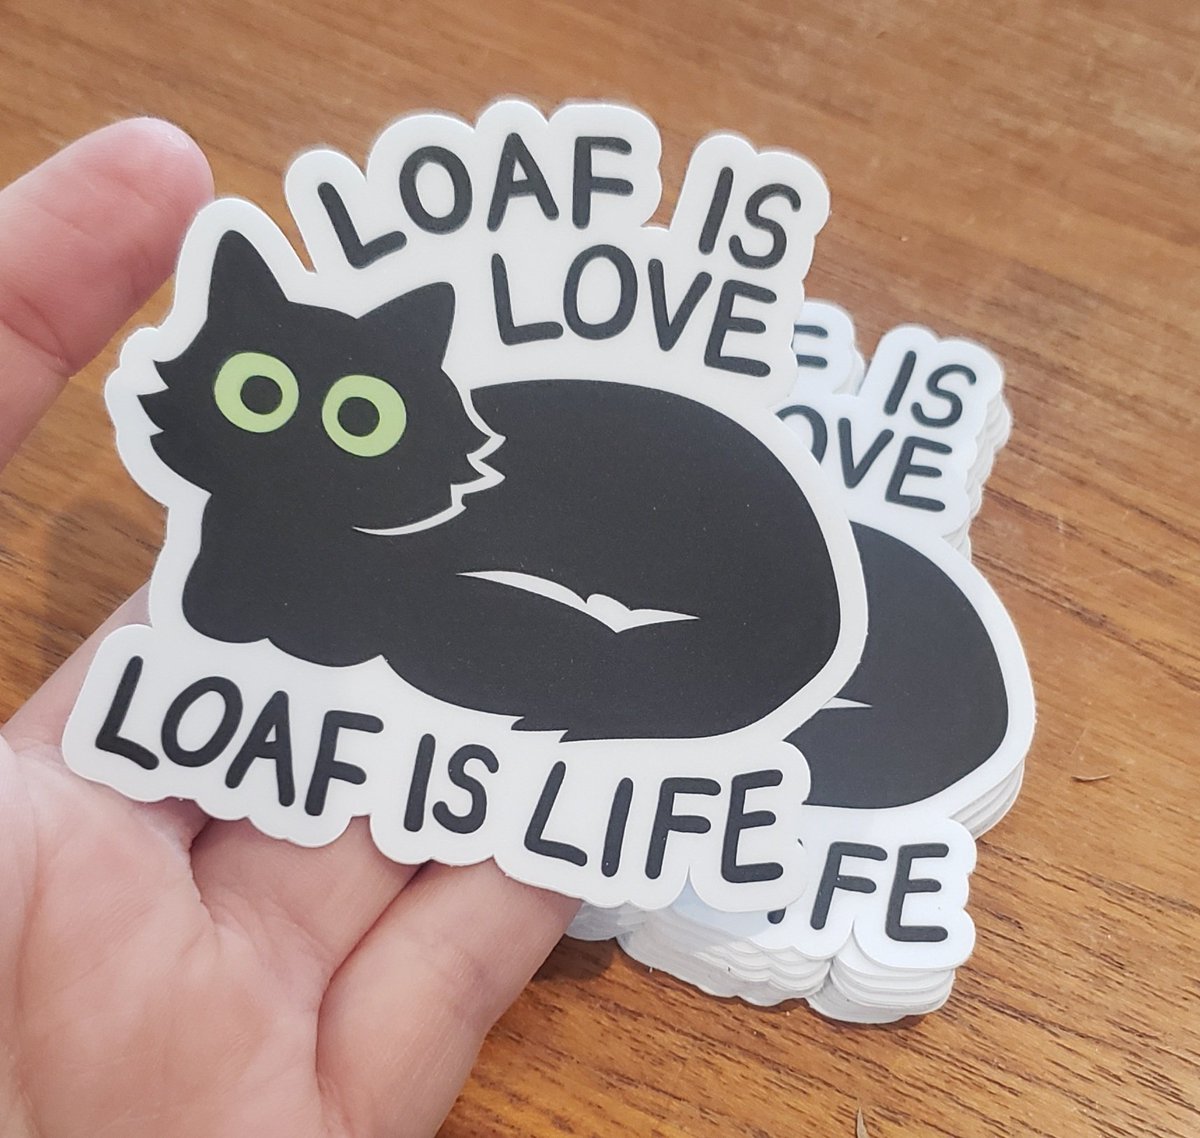 Fresh stickers dropped, just in time for TCAF!